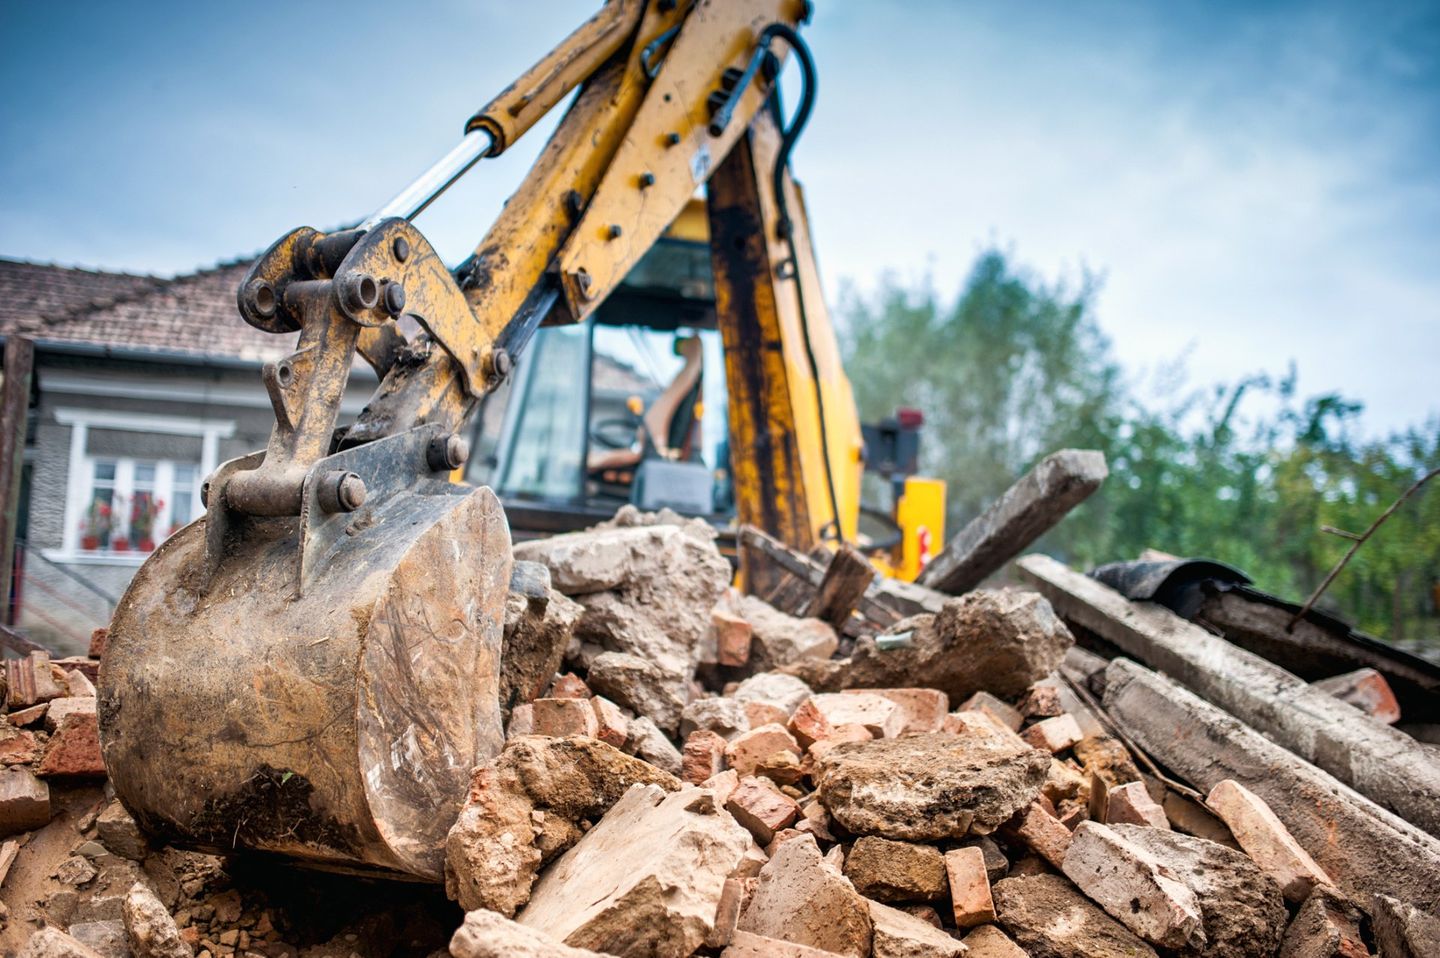 Construction Cleanup — Excavator Removing Construction Site Debris in Rochester Hills, MI